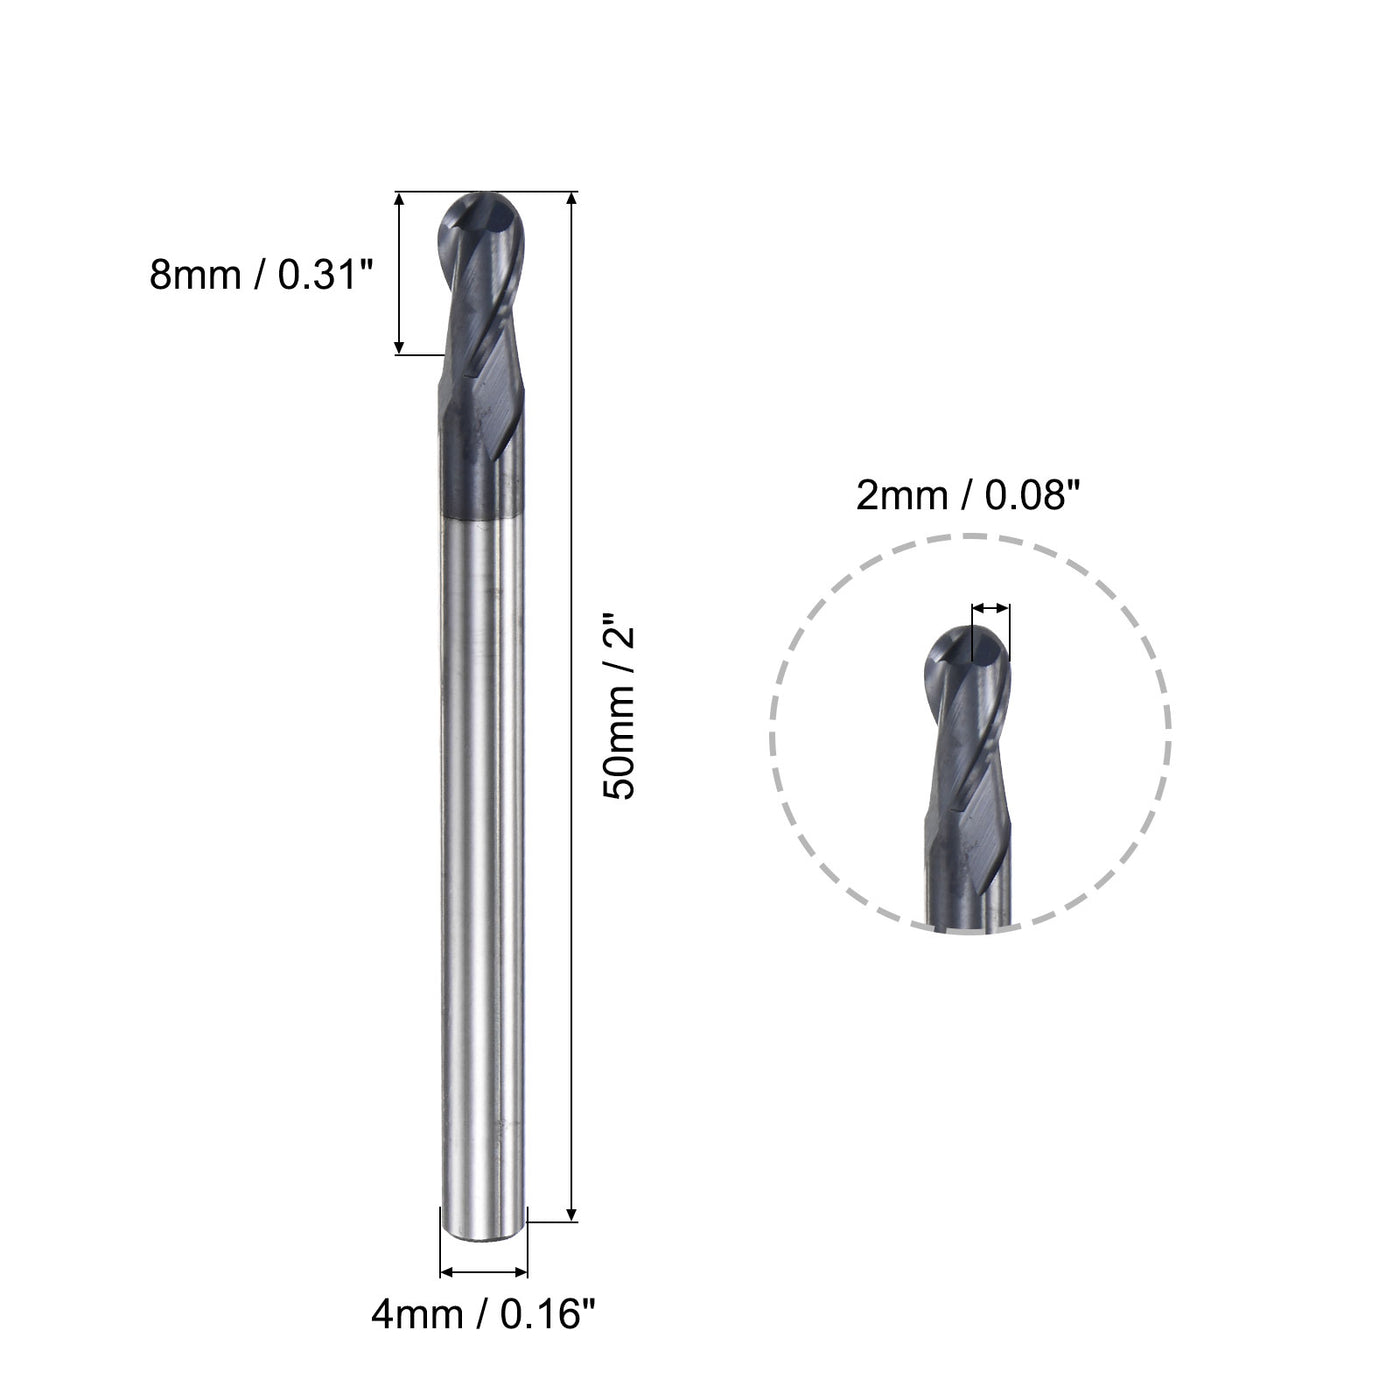 uxcell Uxcell 2mm Radius 50mm Long HRC45 Carbide AlTiSin Coated 2 Flute Ball Nose End Mill